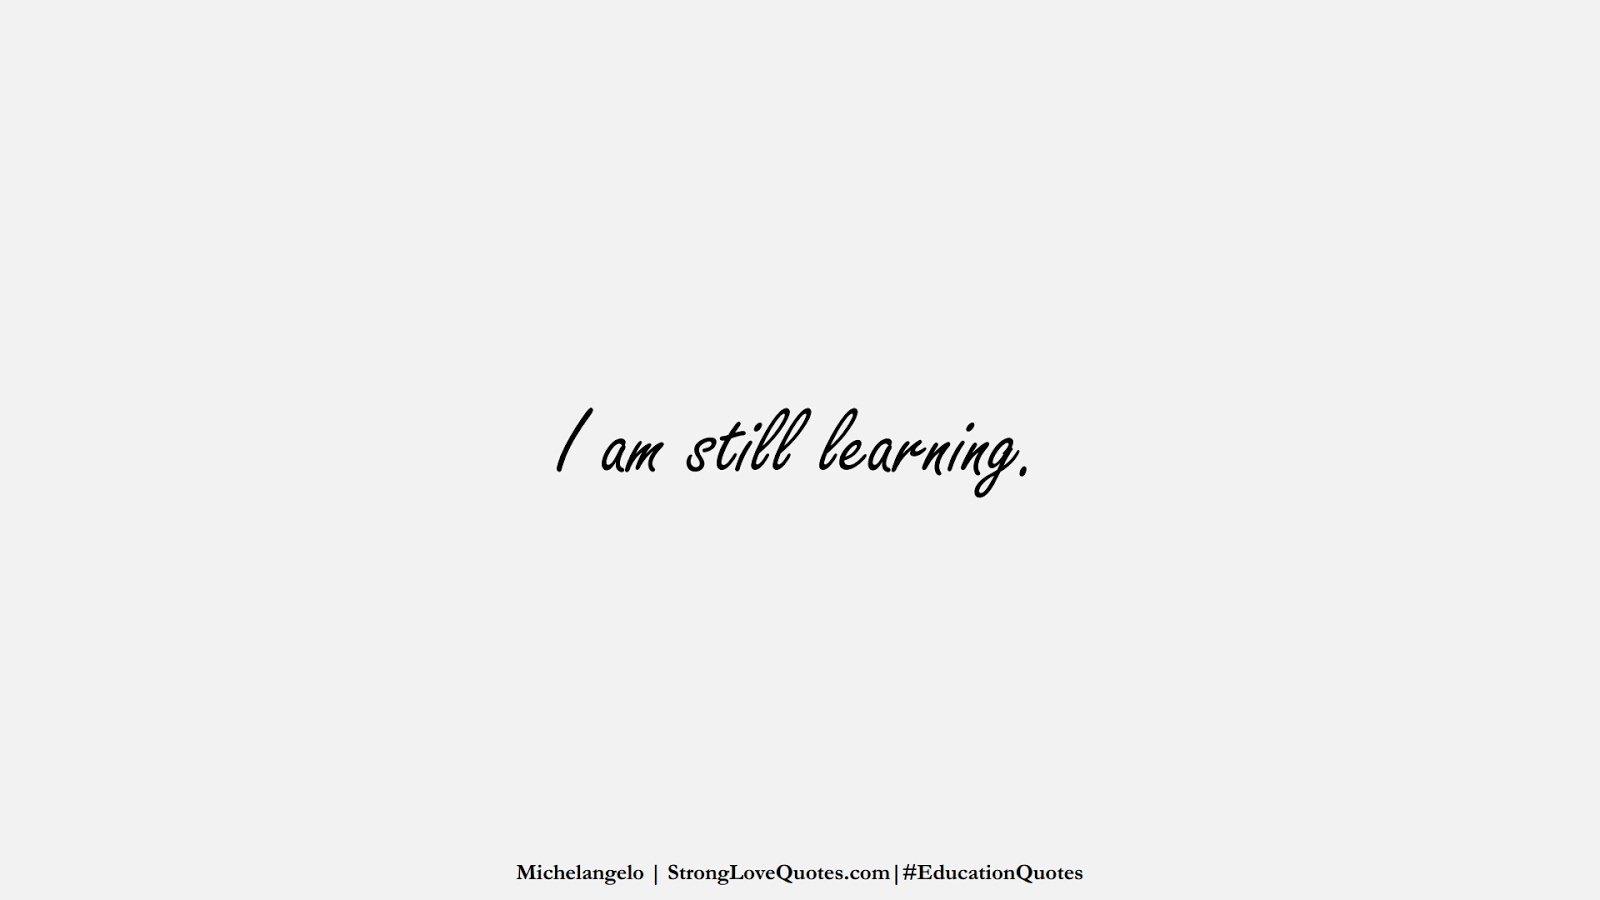 I am still learning. (Michelangelo);  #EducationQuotes